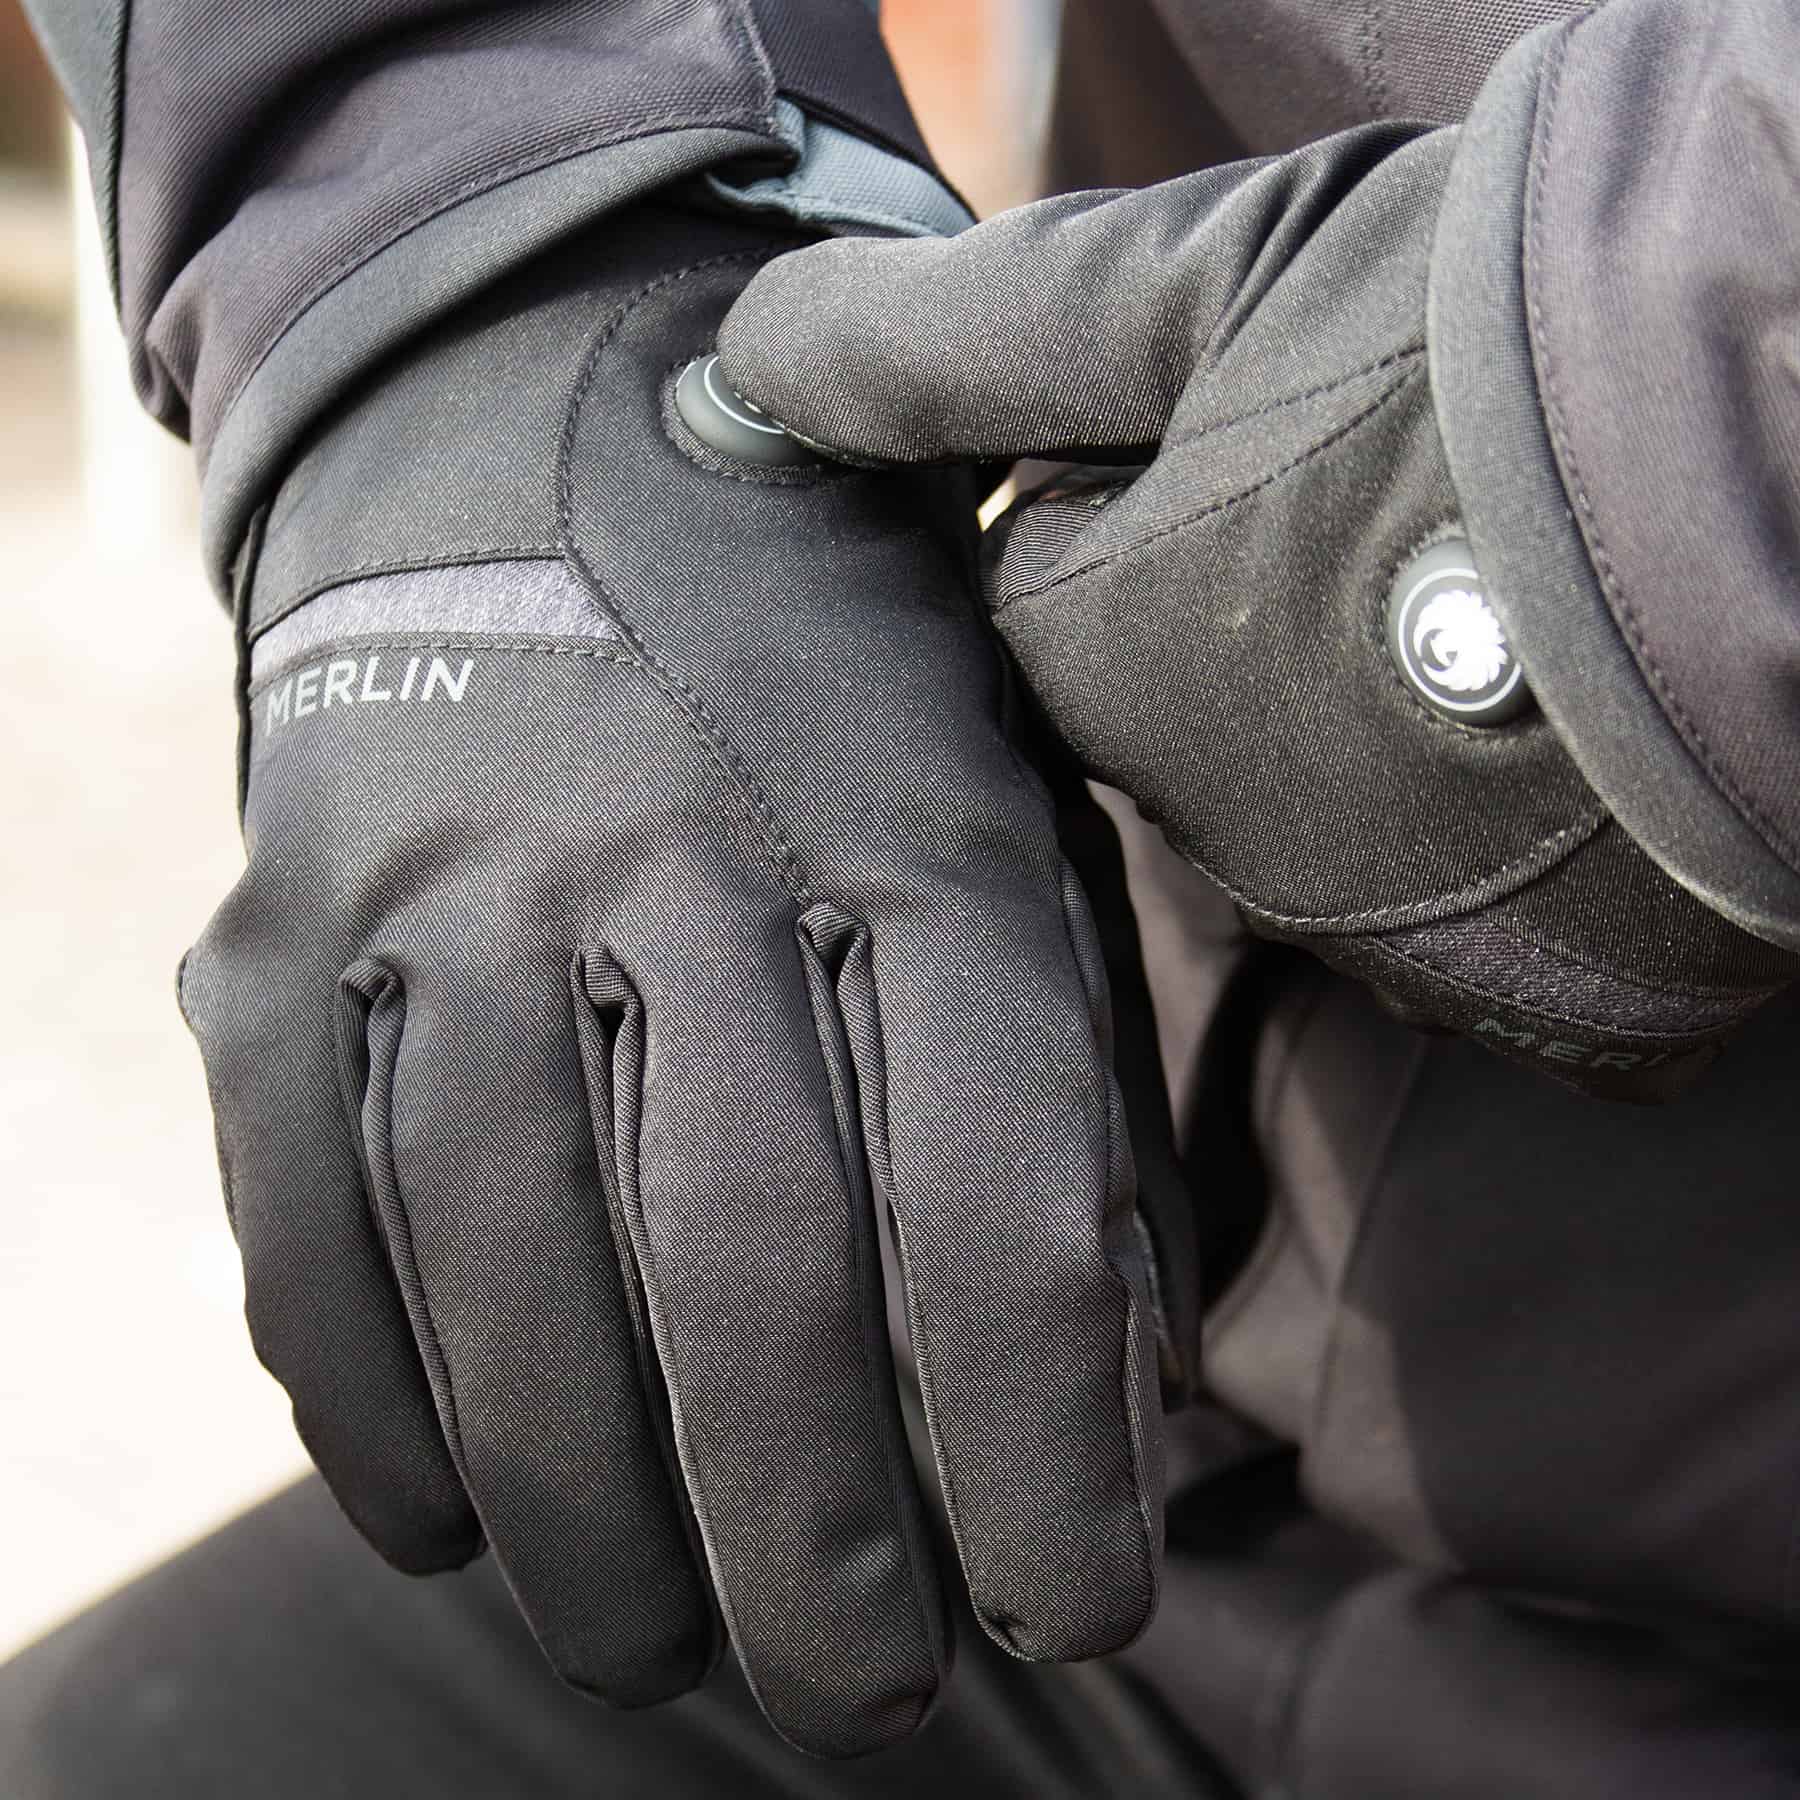 Lifestyle image of the Merlin Finchley heated gloves